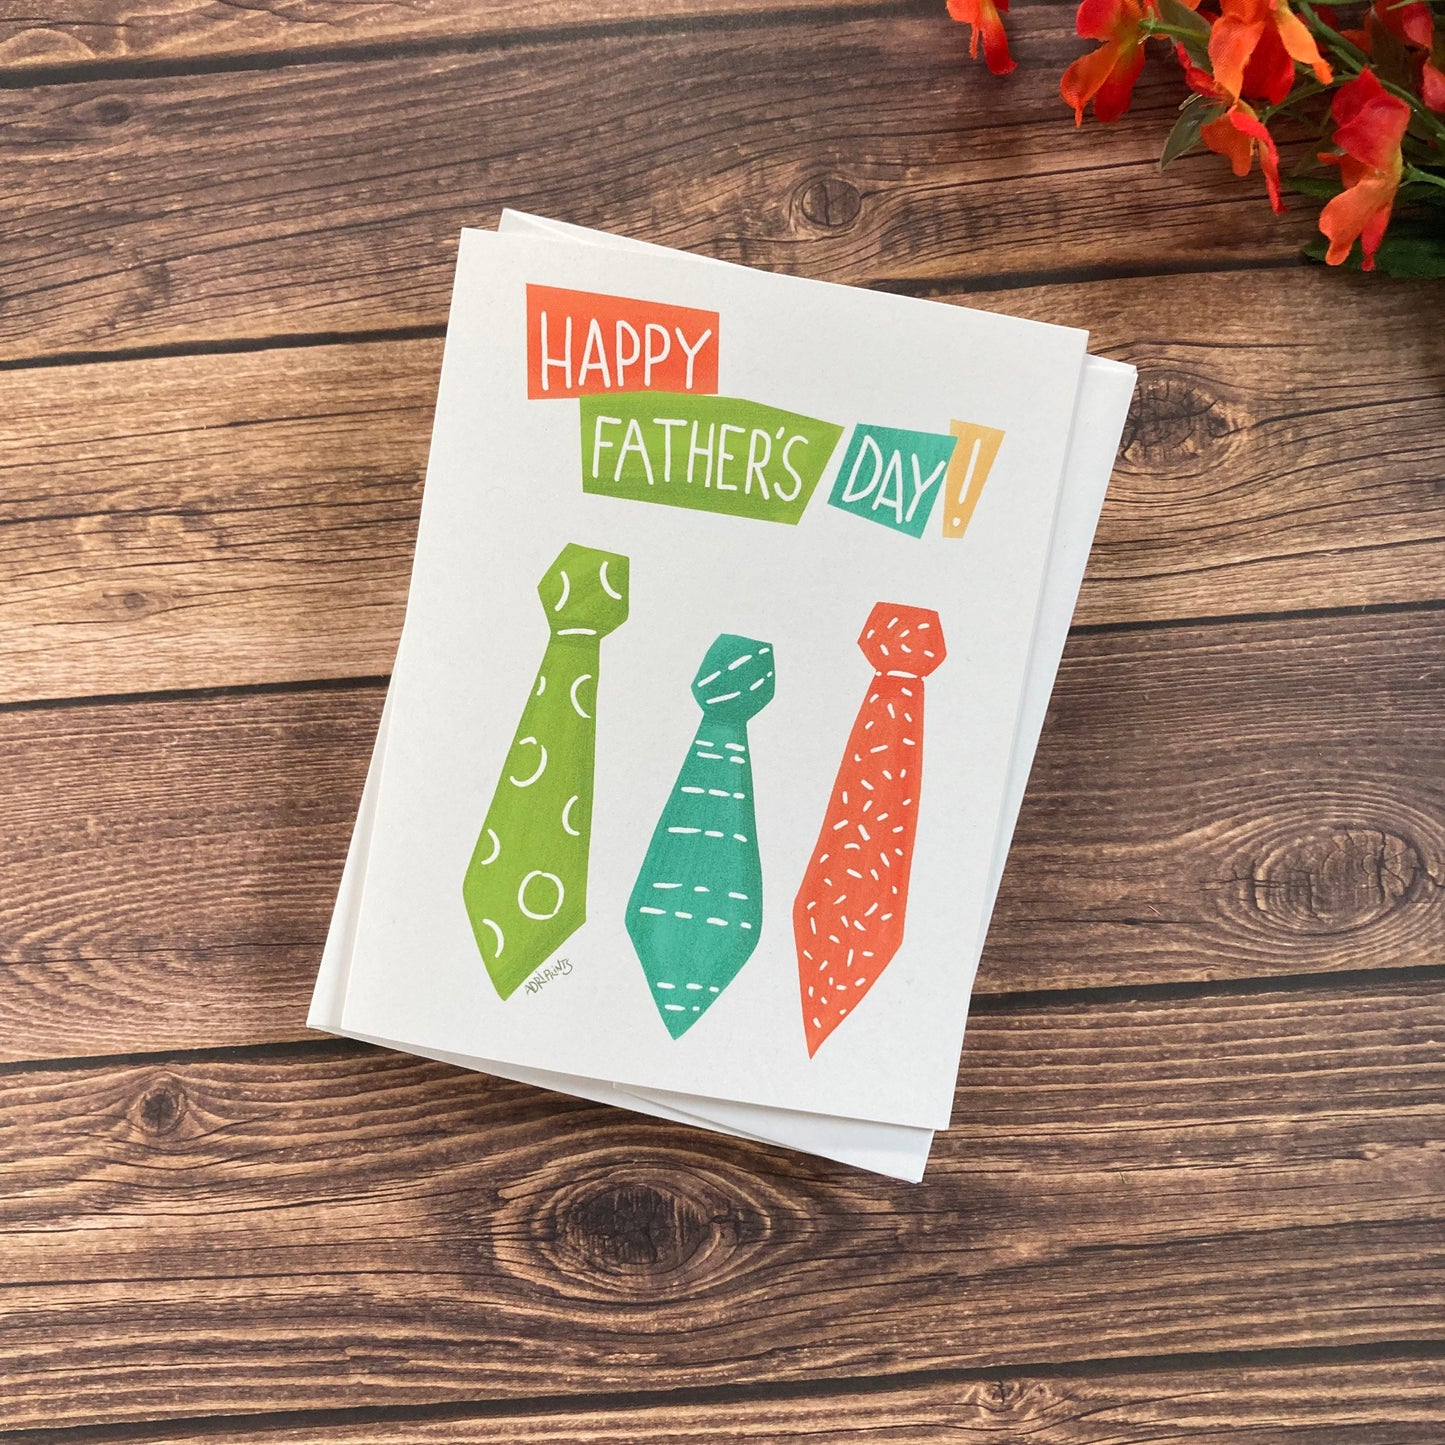 FATHER - Happy Father's Day! - Simple, straightforward card for any dad